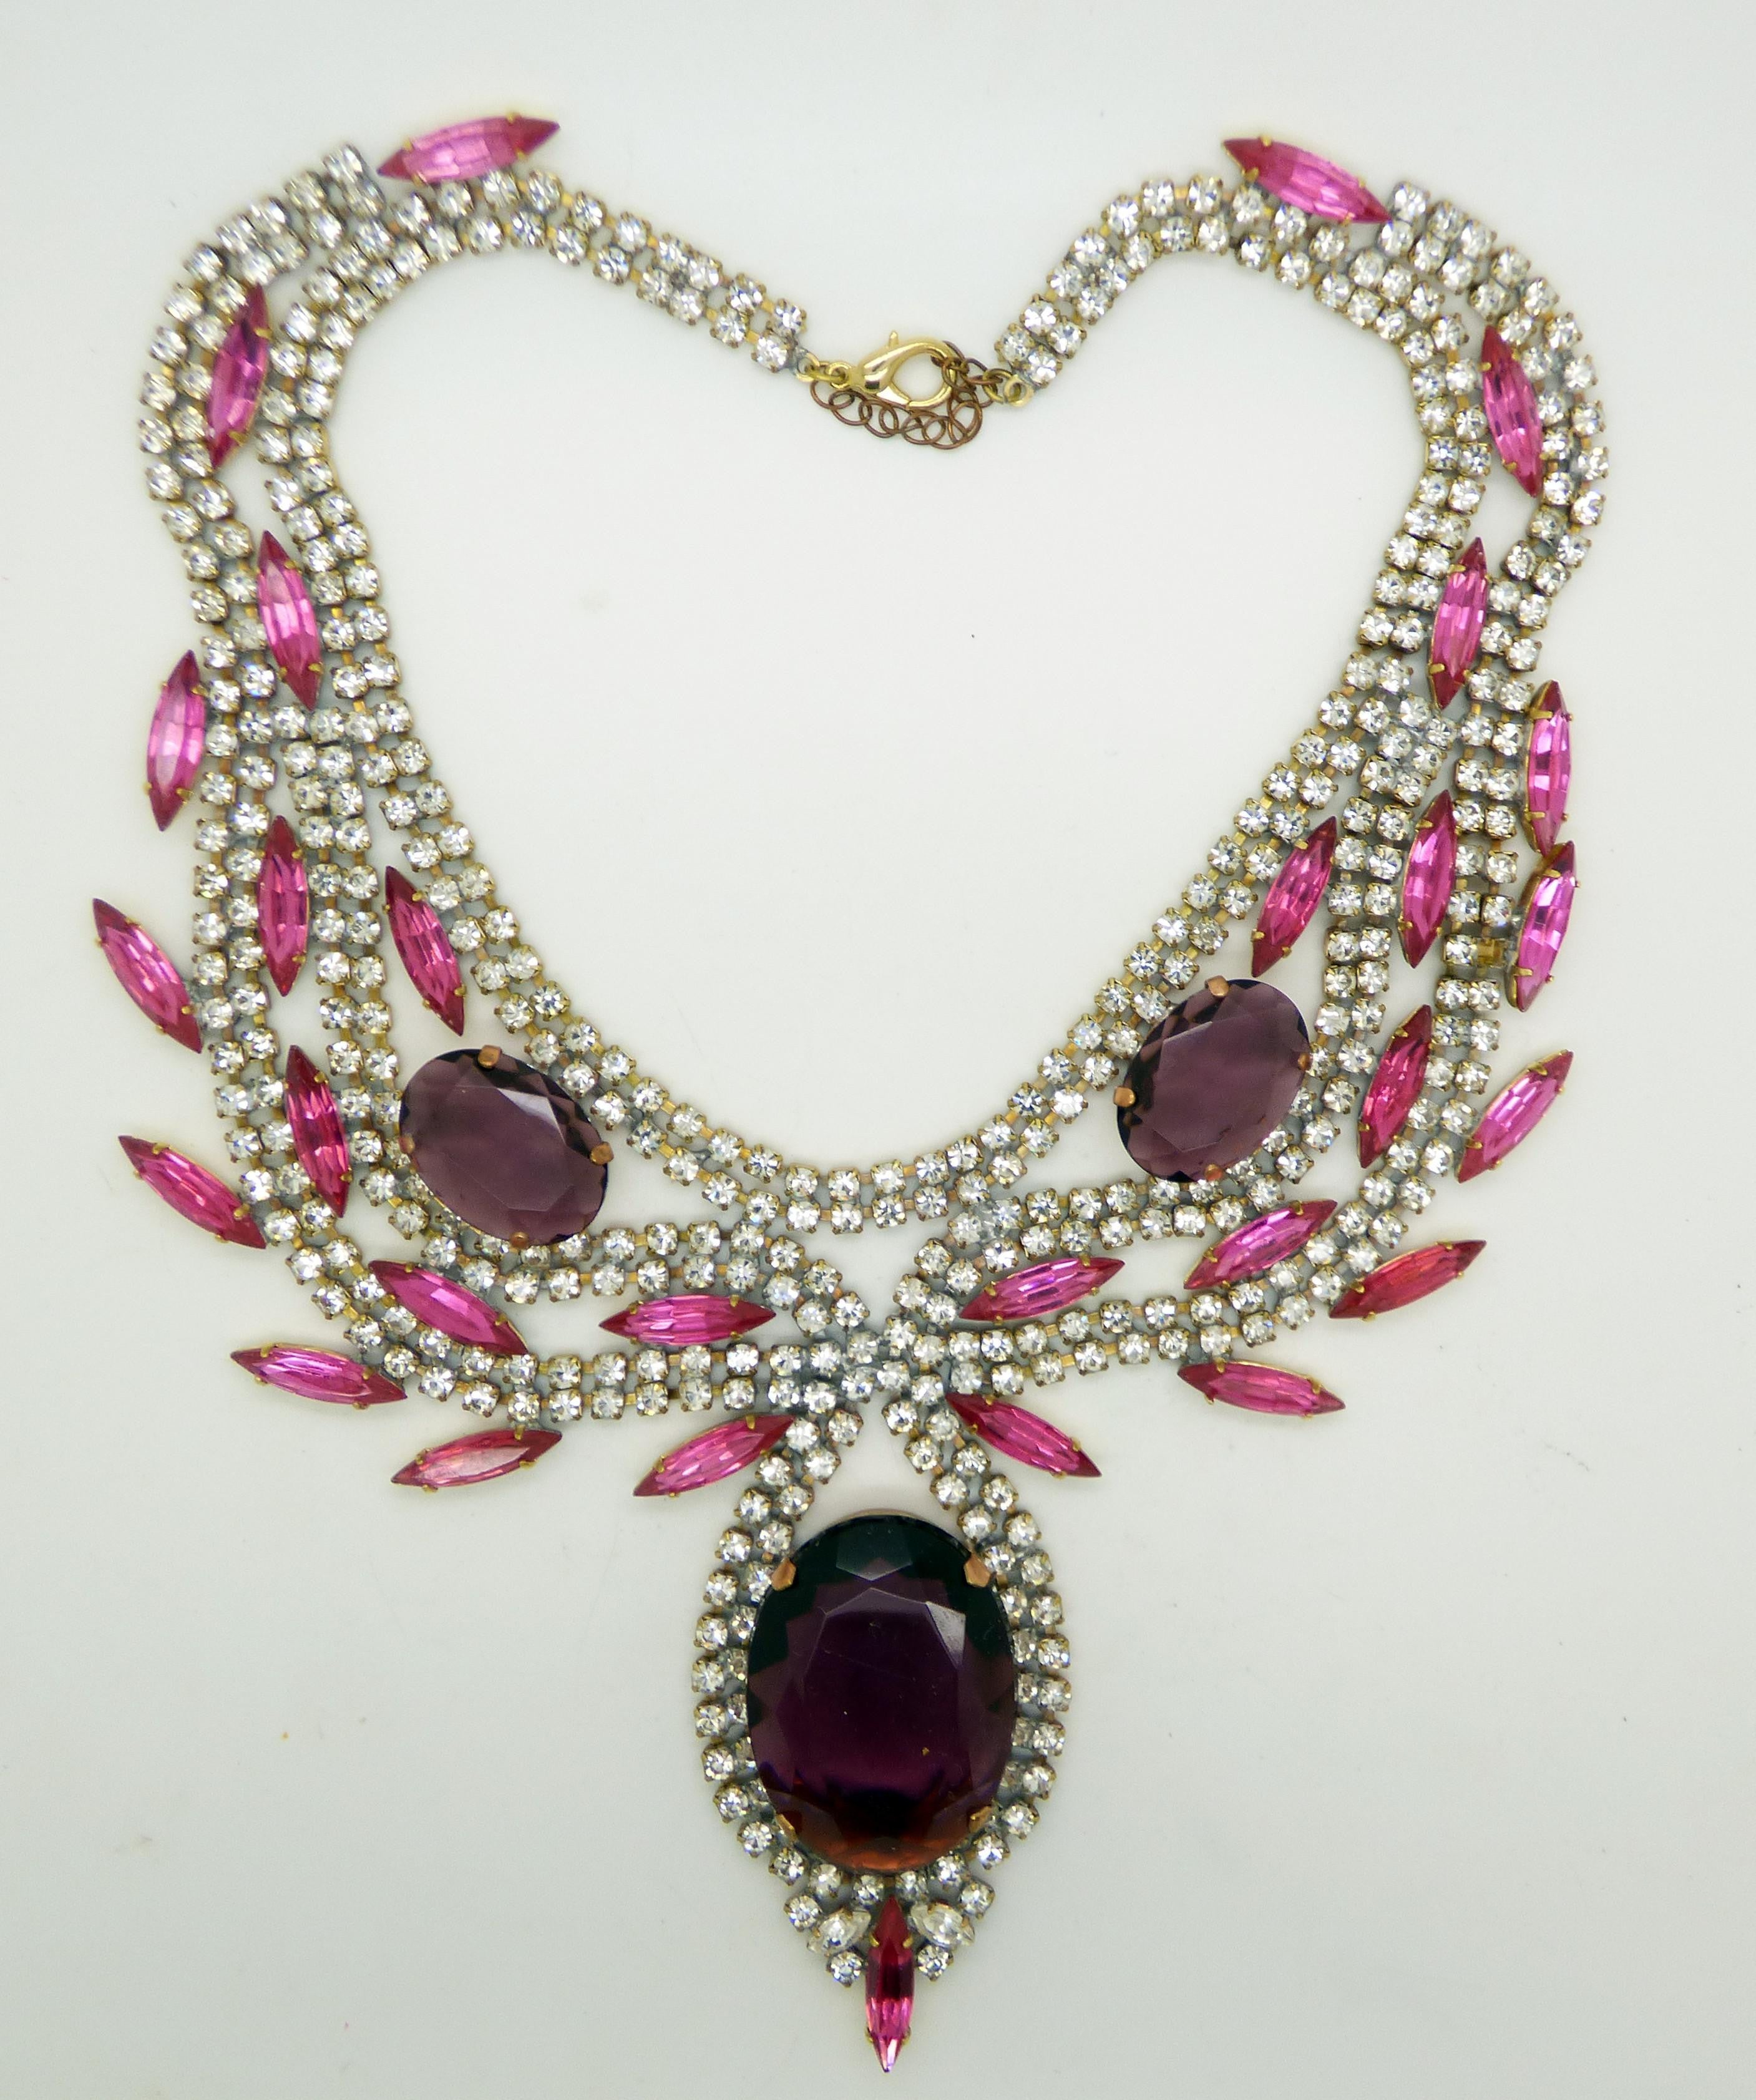 Statement Necklace Husar D. Pink, Purple and Clear Rhinestones ...